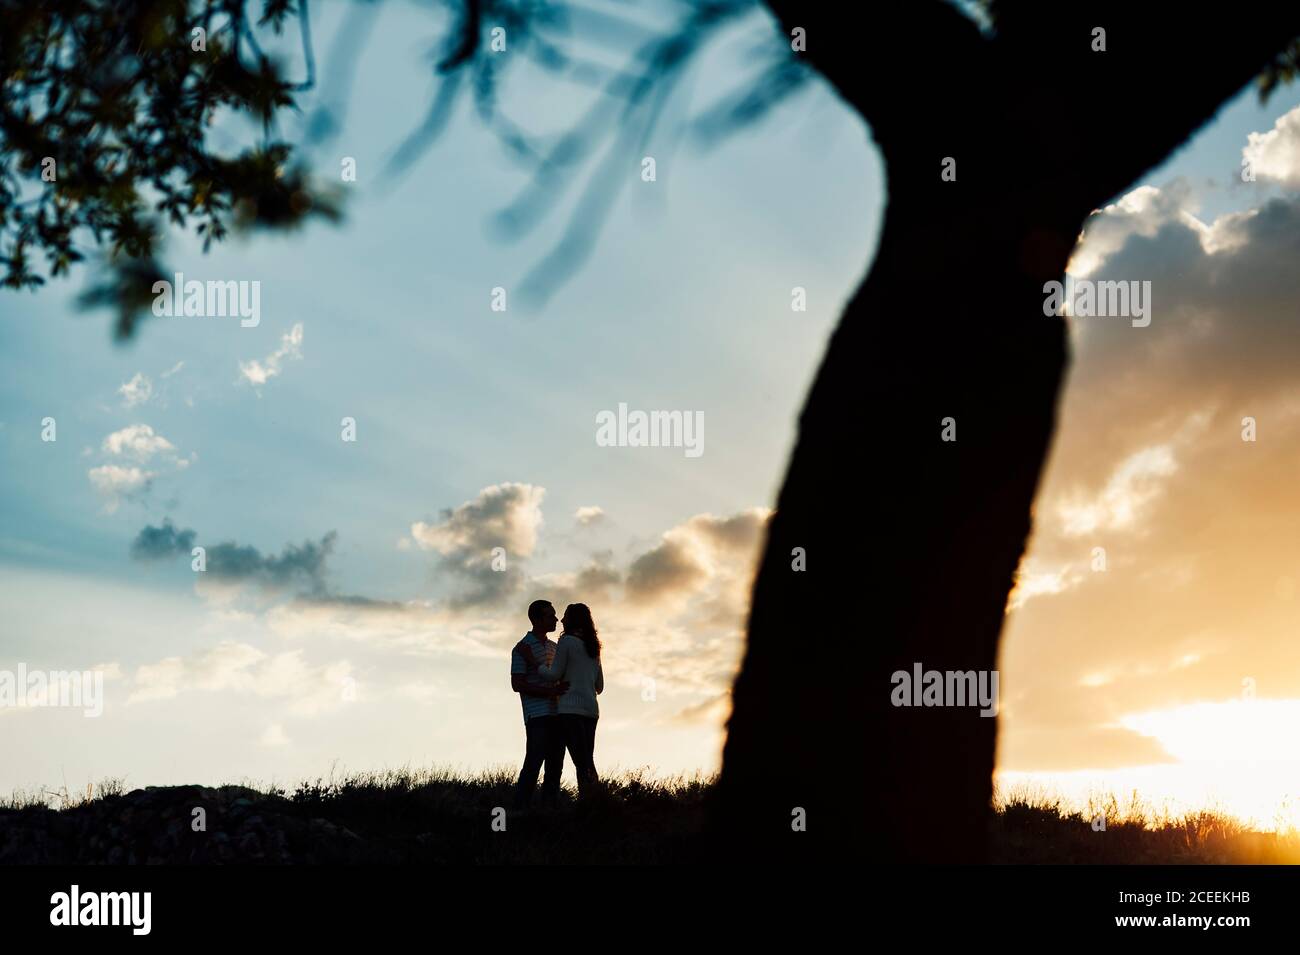 Silhouette of a couple walking at scenic sunset close to a tree Stock Photo